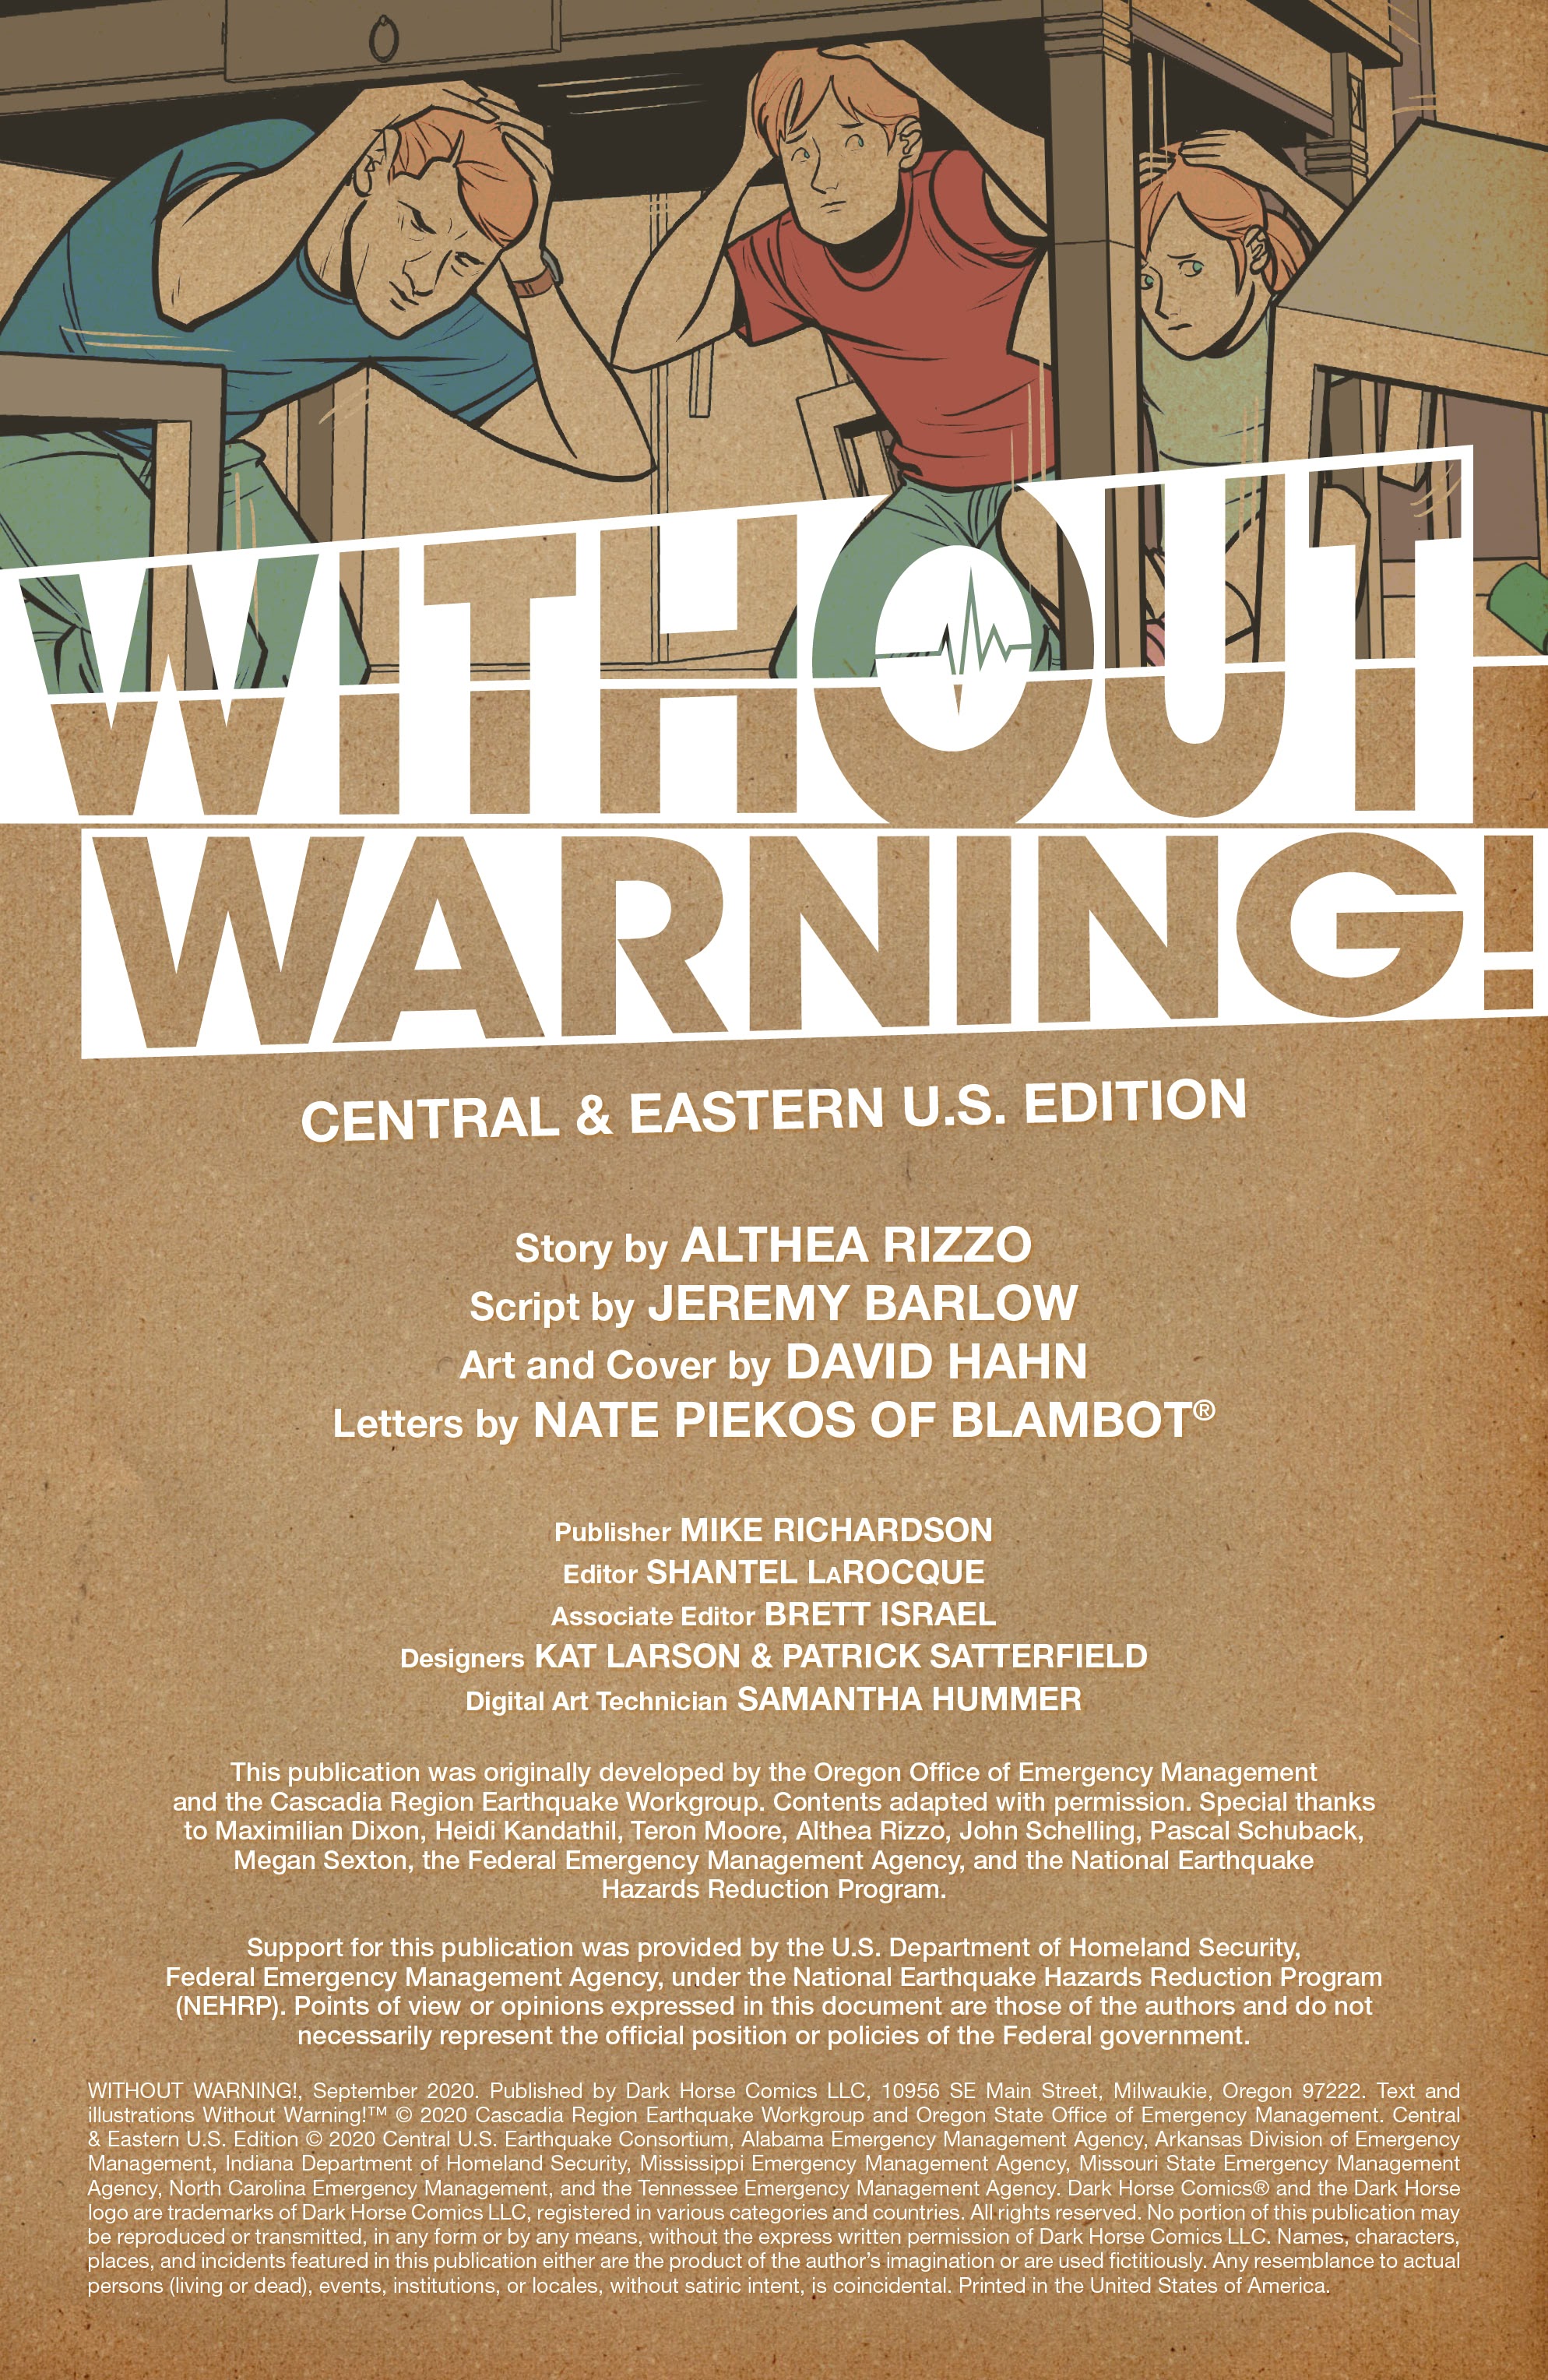 Read online Without Warning! comic -  Issue # Earthquake (CUSEC) - 2